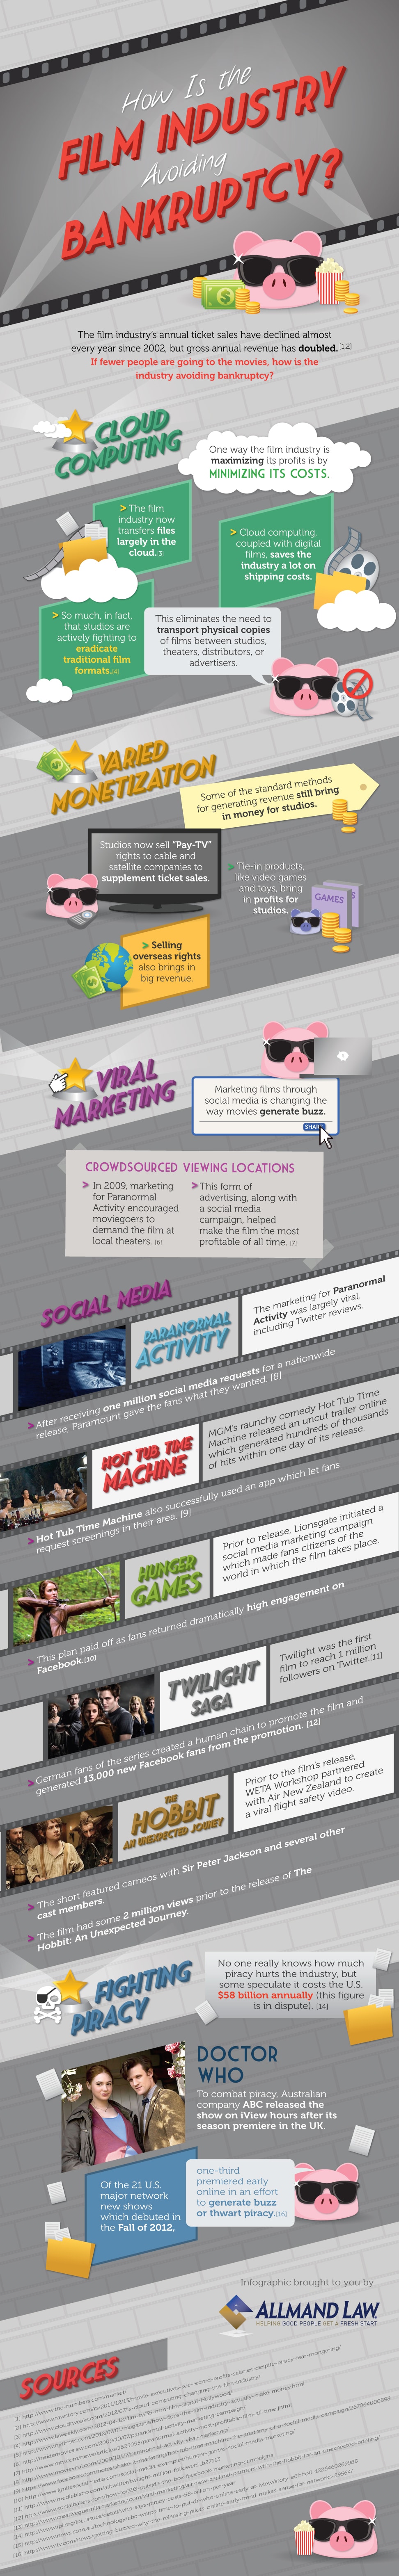 Film Industry Gets Creatively Social To Survive [Infographic]